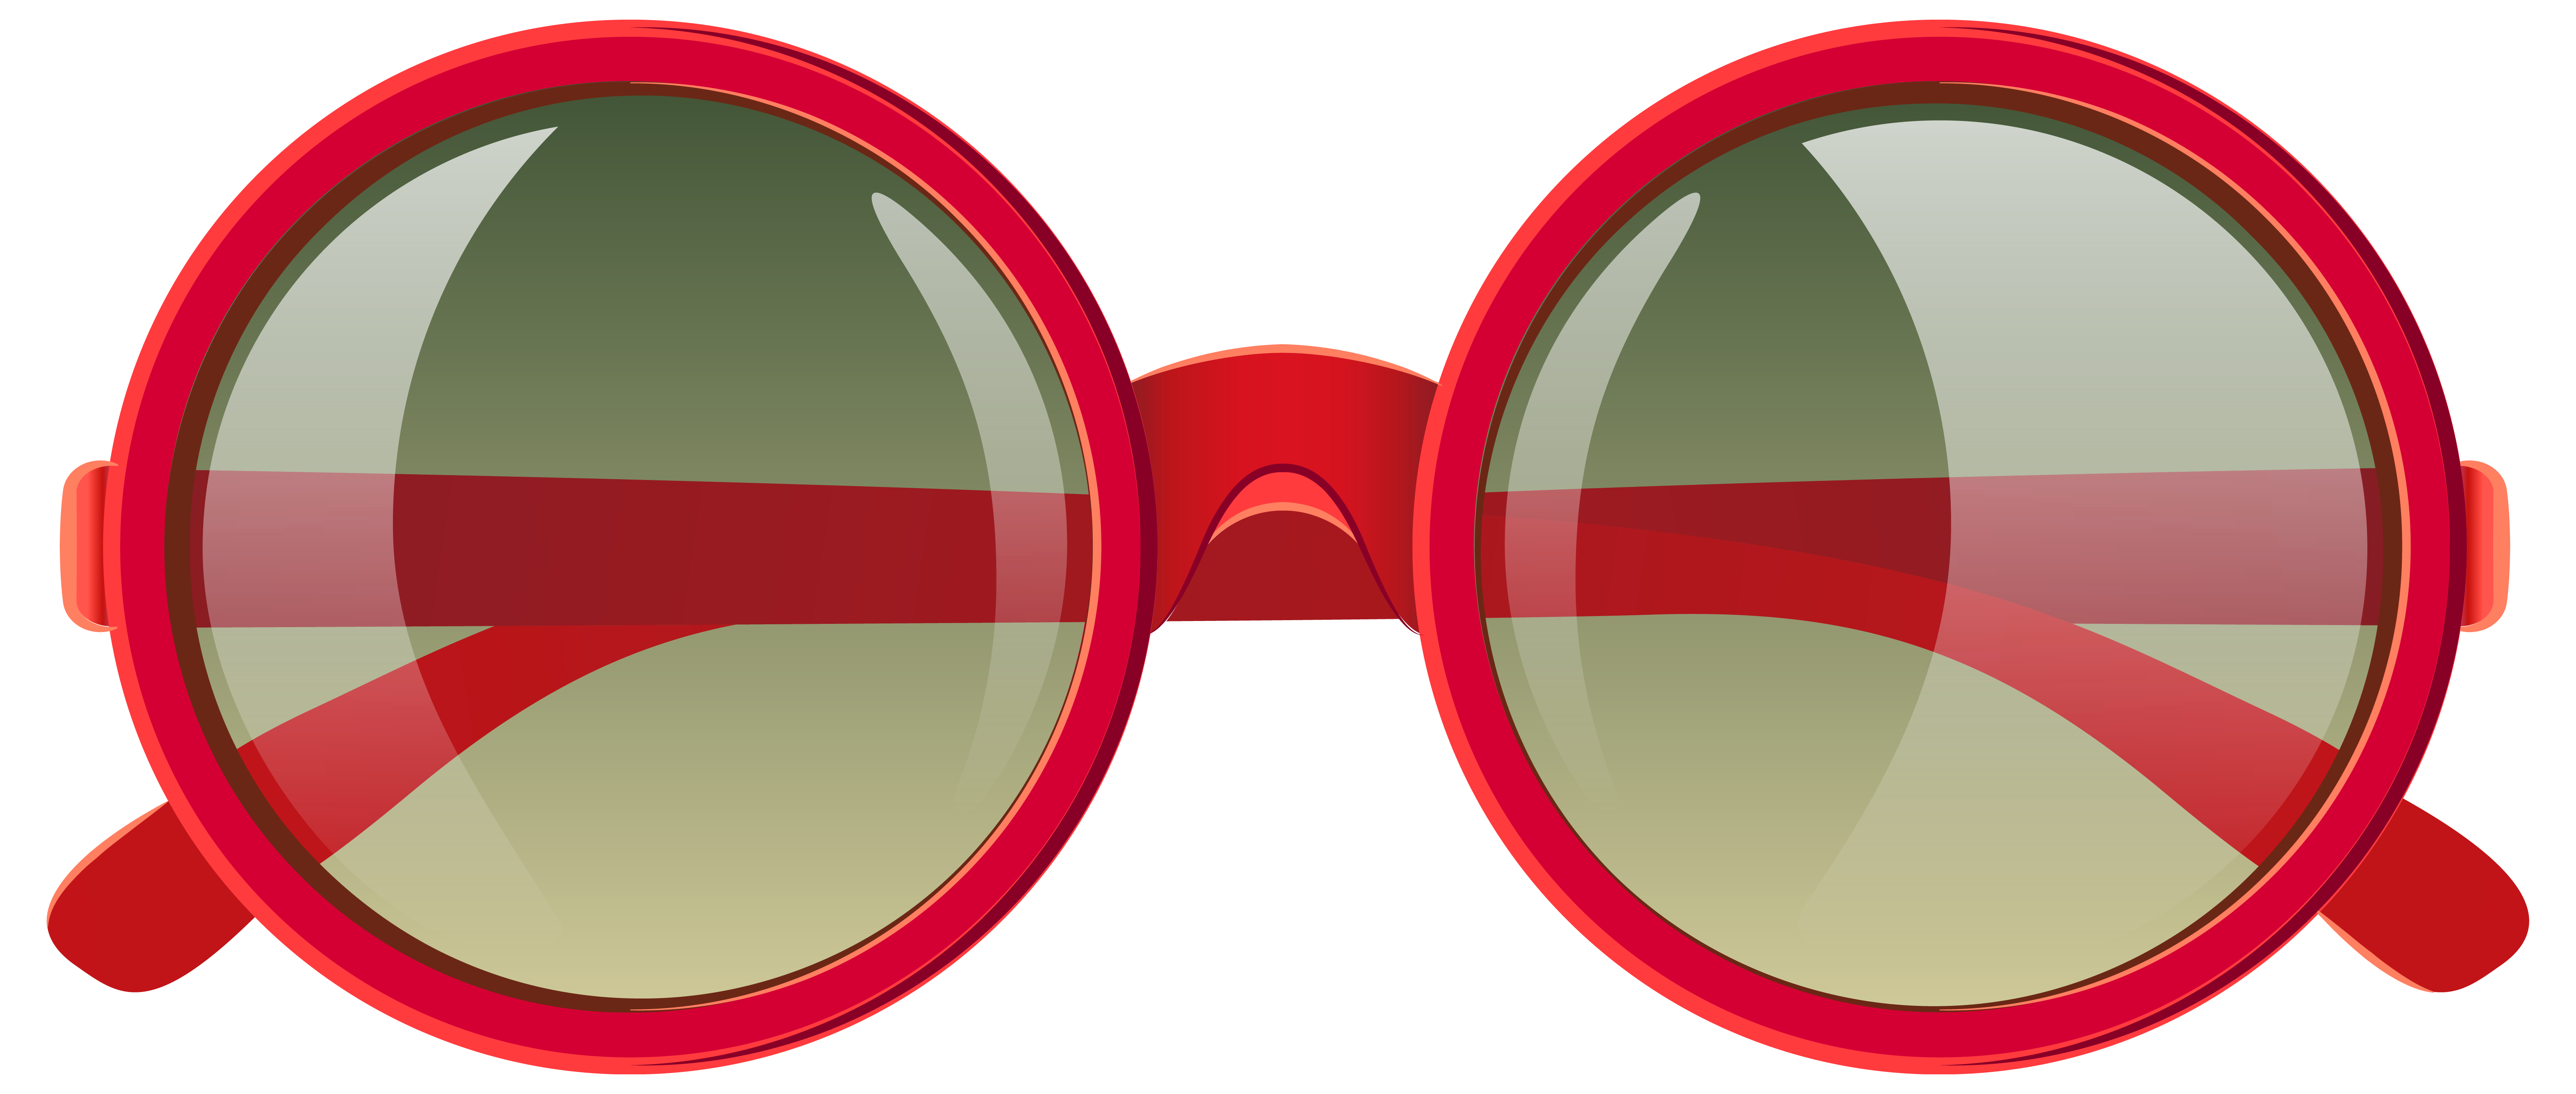 Female clipart sunglasses. Cute red png image